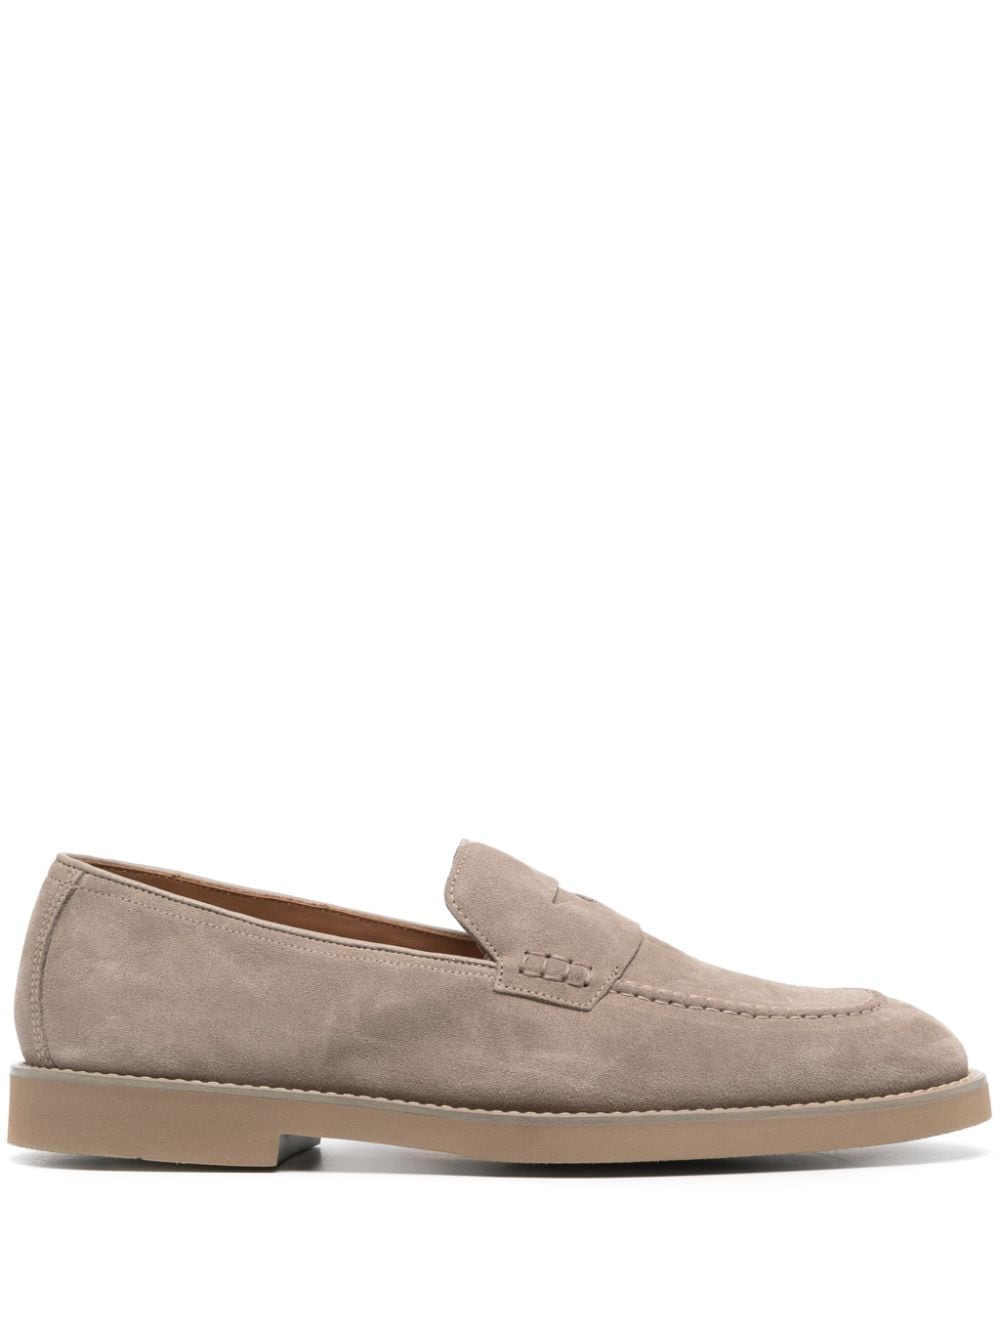 Doucal's almond suede loafers - Neutrals von Doucal's